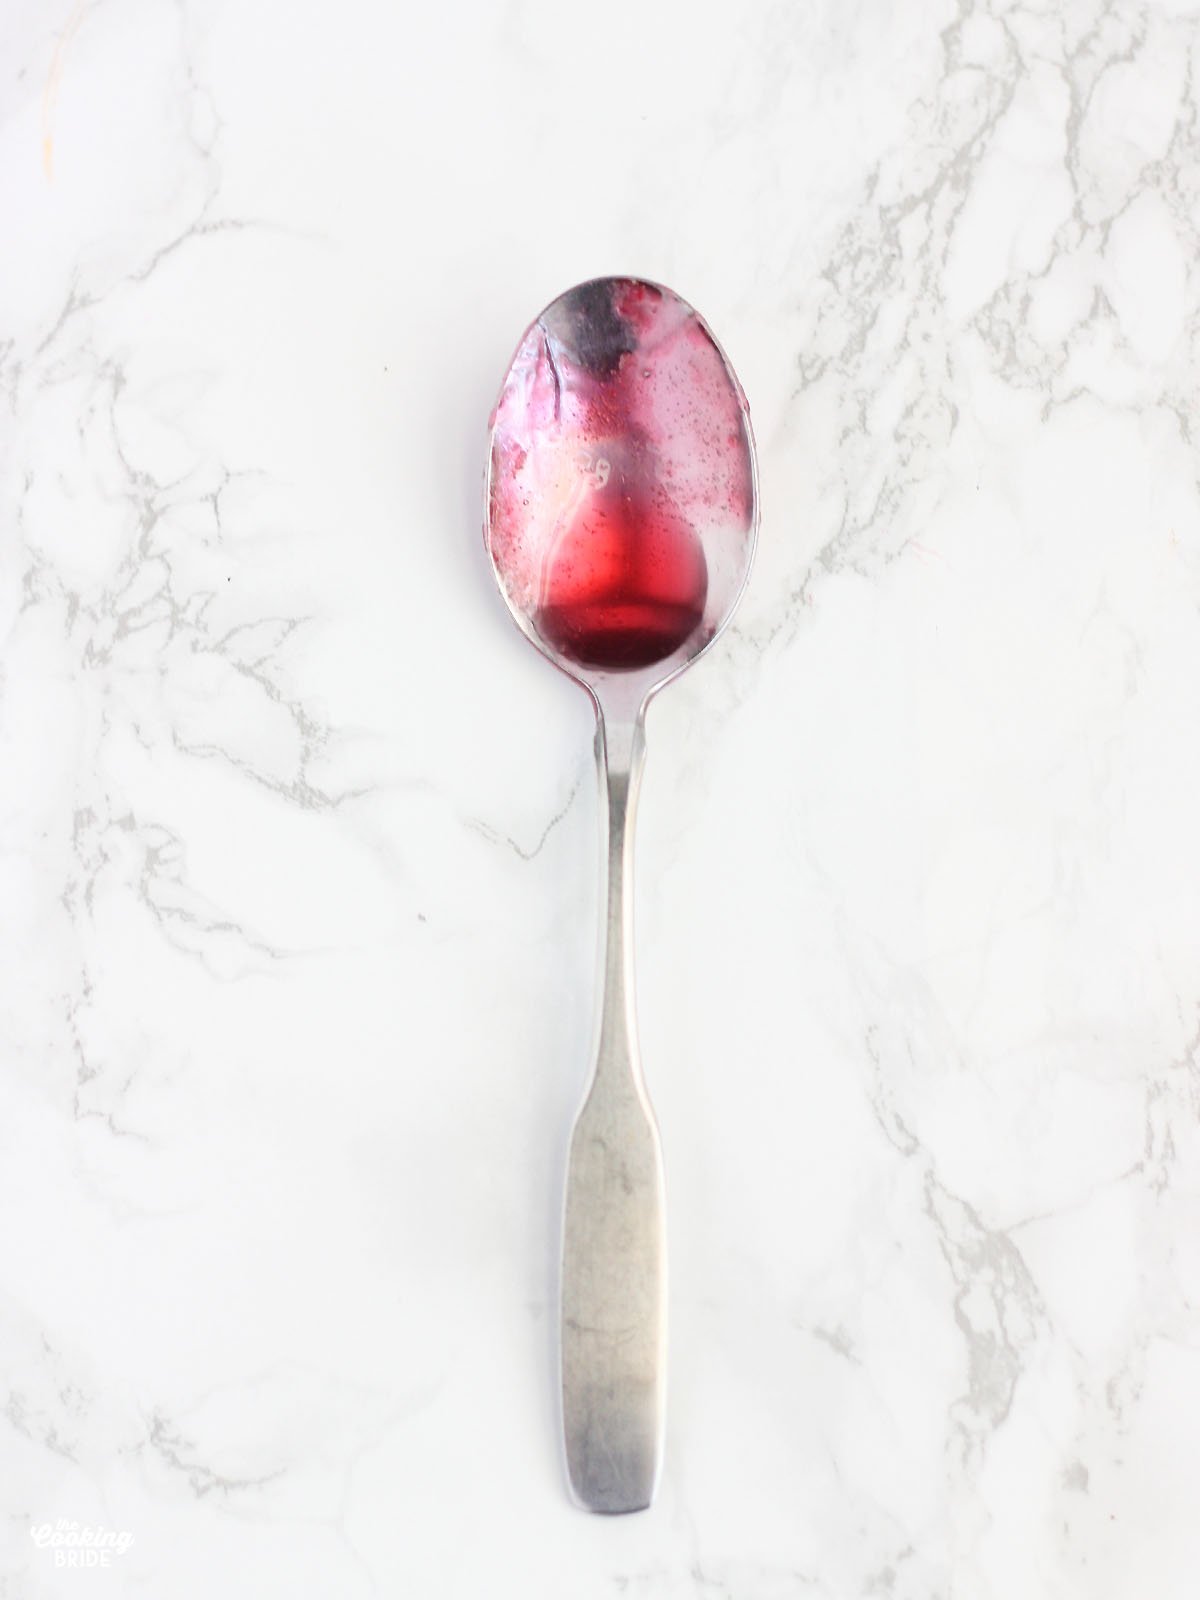 metal spoon covered with a drop of plum jelly on it